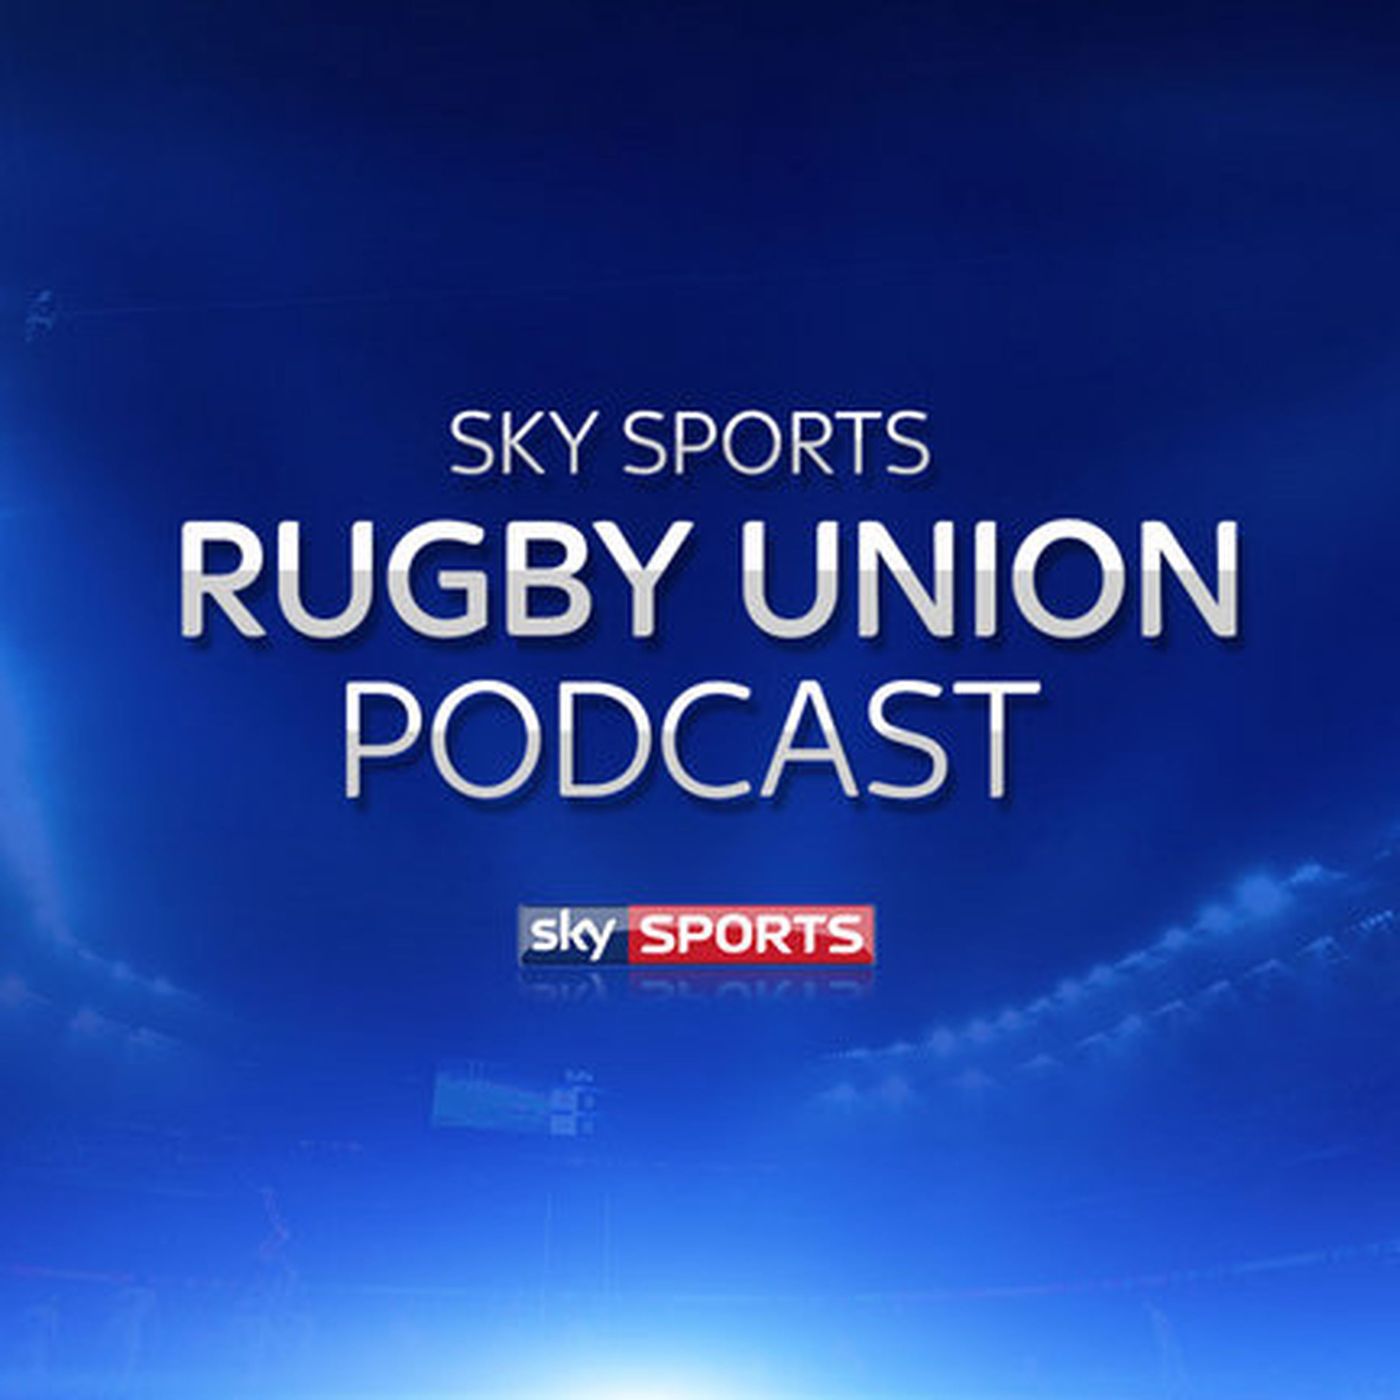 Sky Sports Rugby Union Podcast - 16th Sept